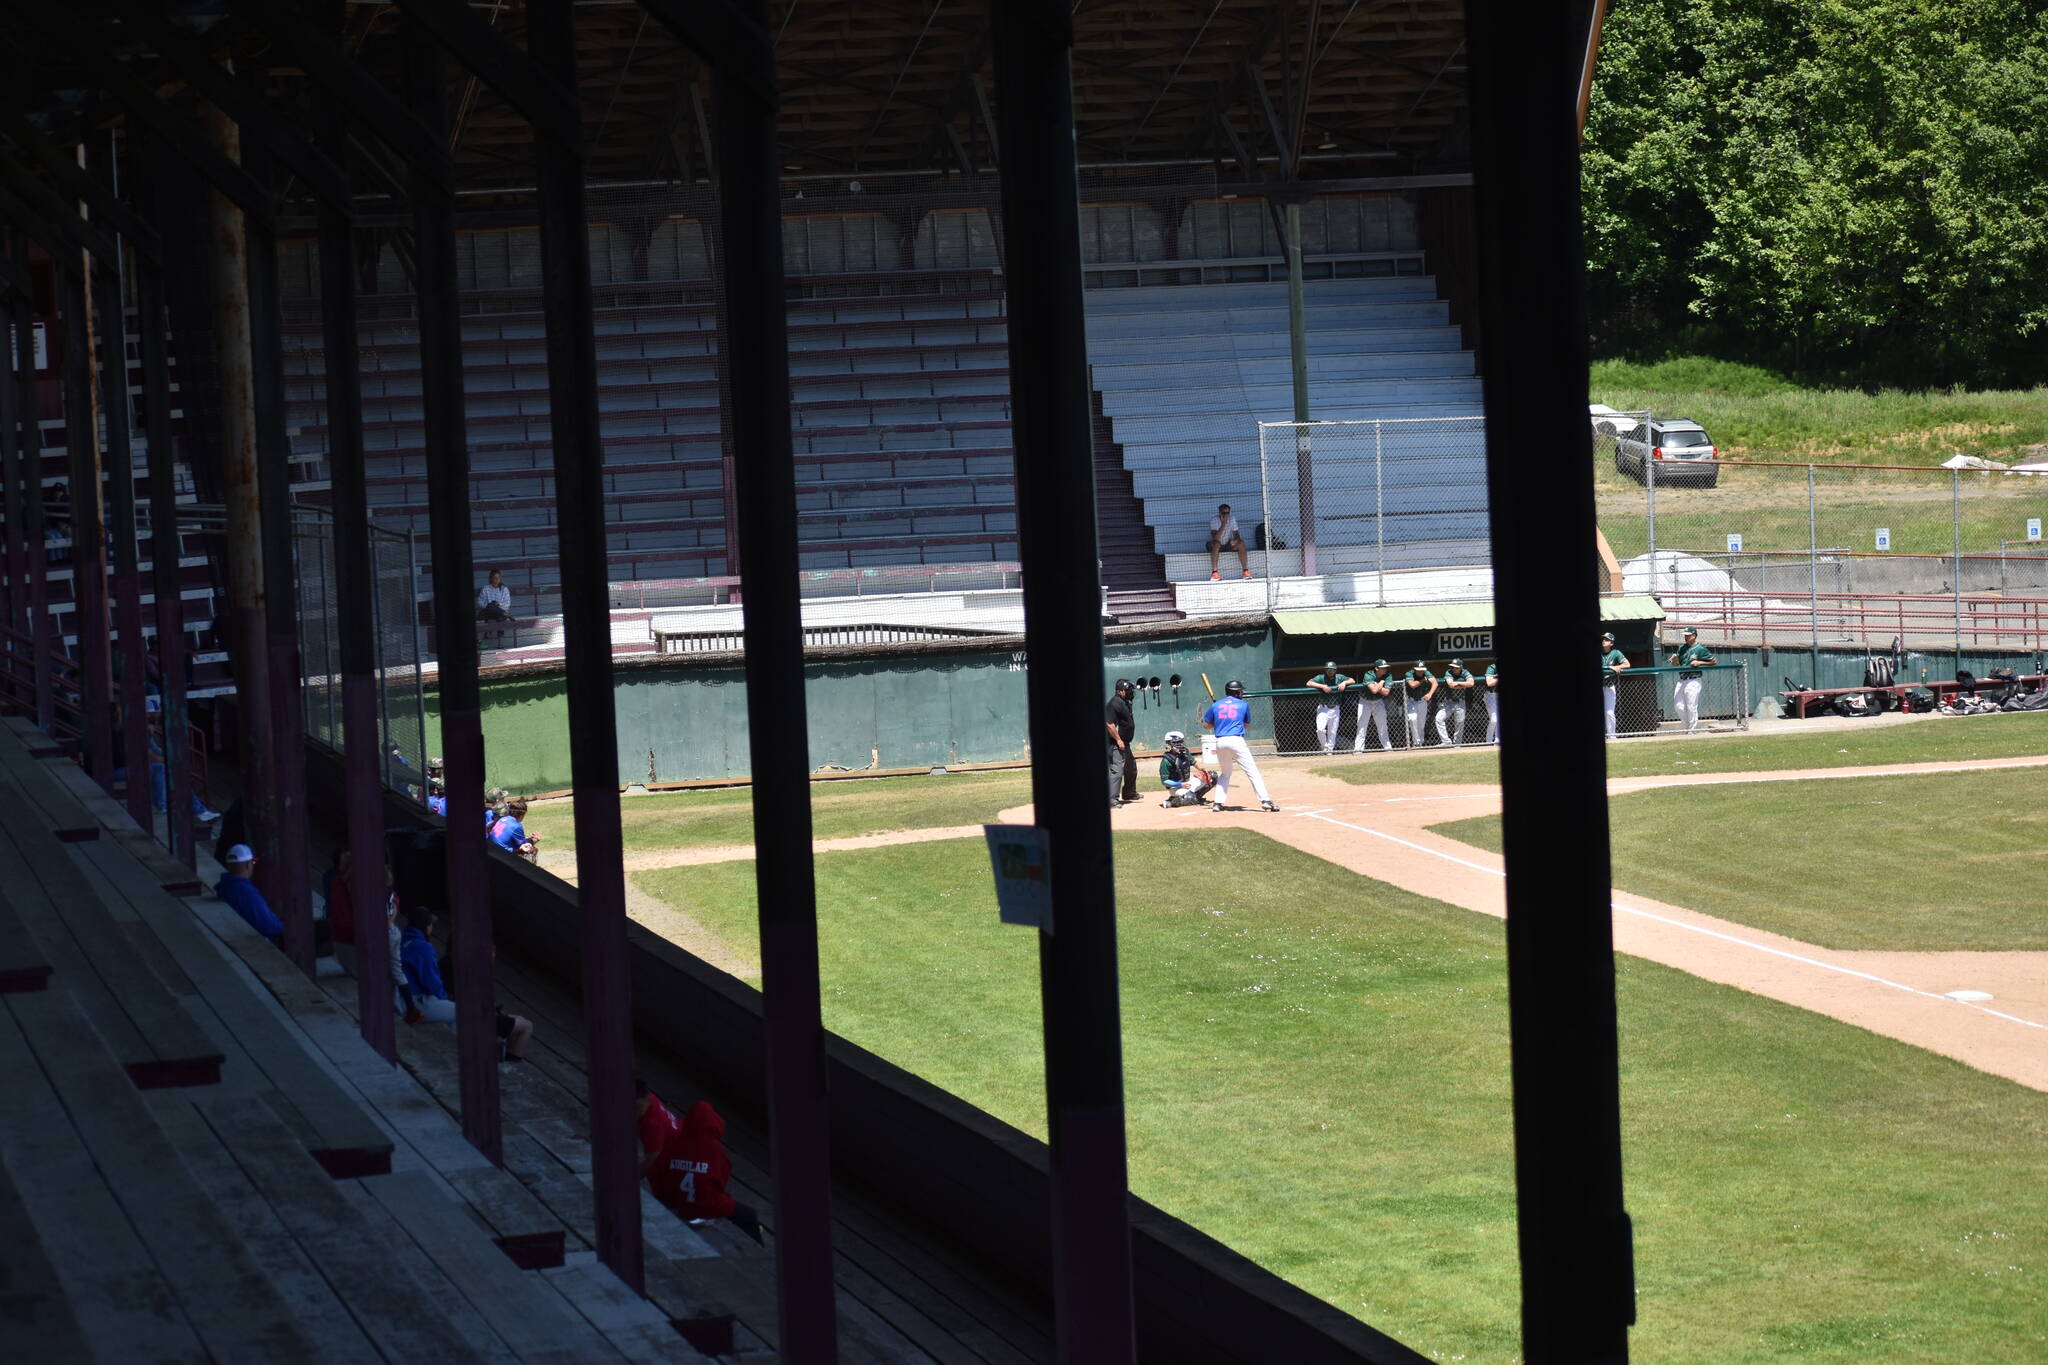 Constructed in 1938 with a half-million board feet of old growth fir, Olympic Stadium is the largest all-wooden grandstand in the country, according to the National Register of Historic Places.